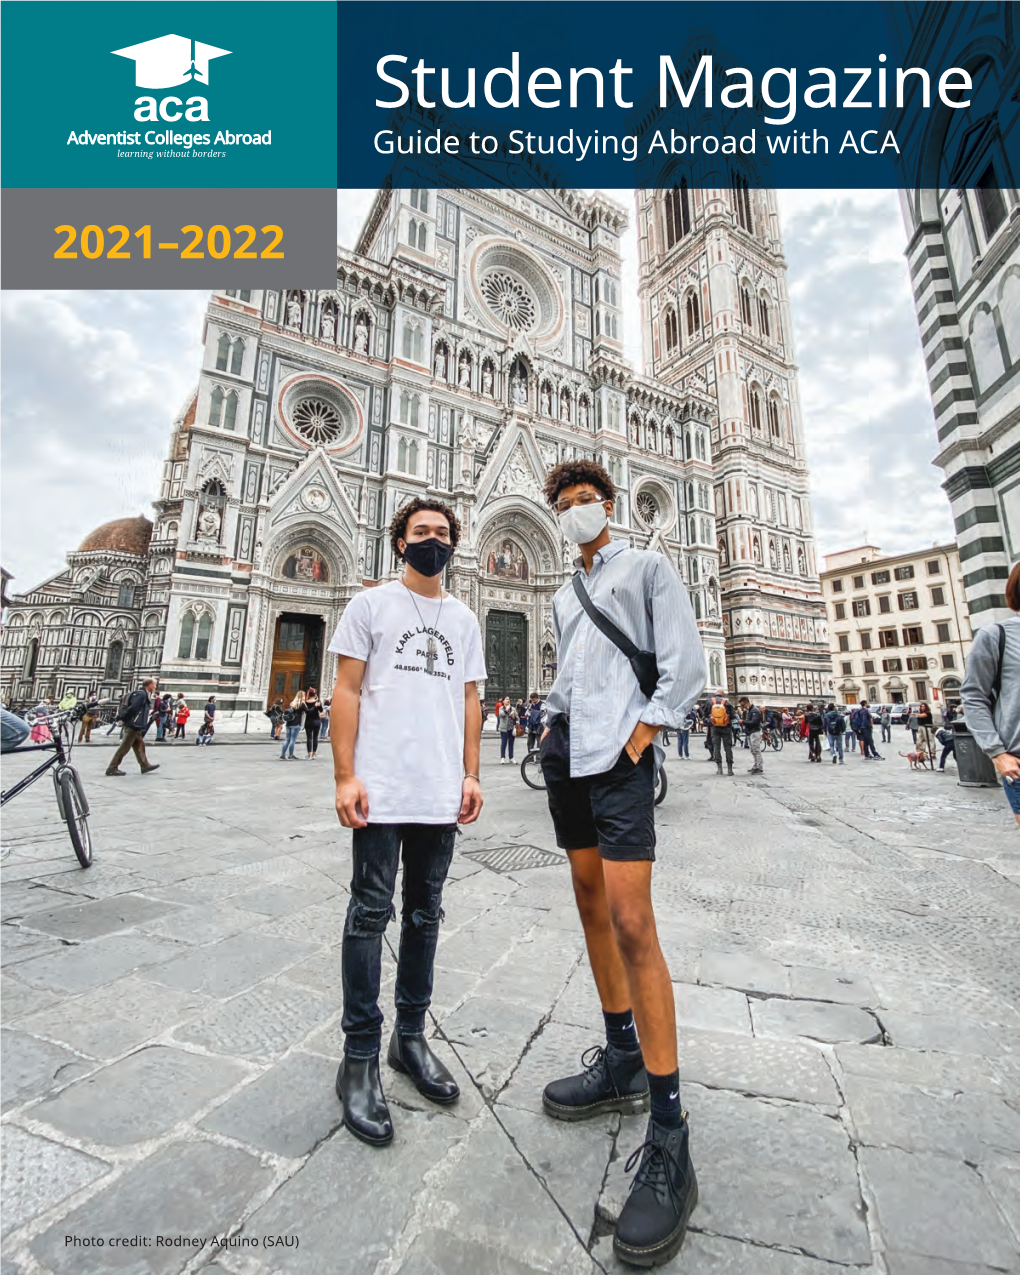 Student Magazine Guide to Studying Abroad with ACA